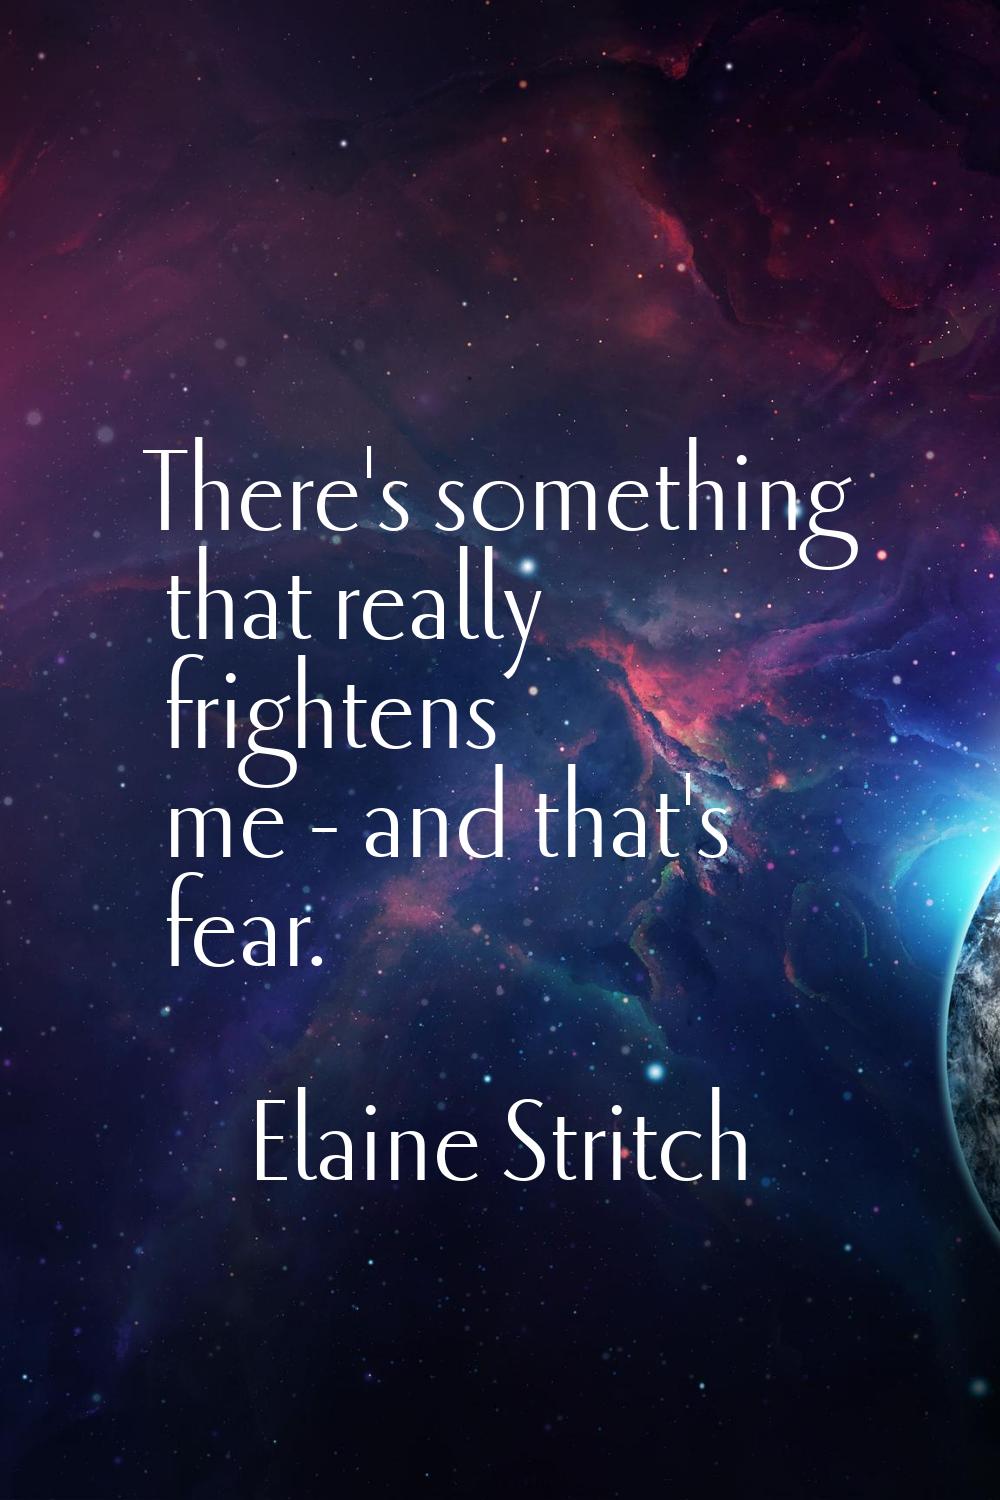 There's something that really frightens me - and that's fear.